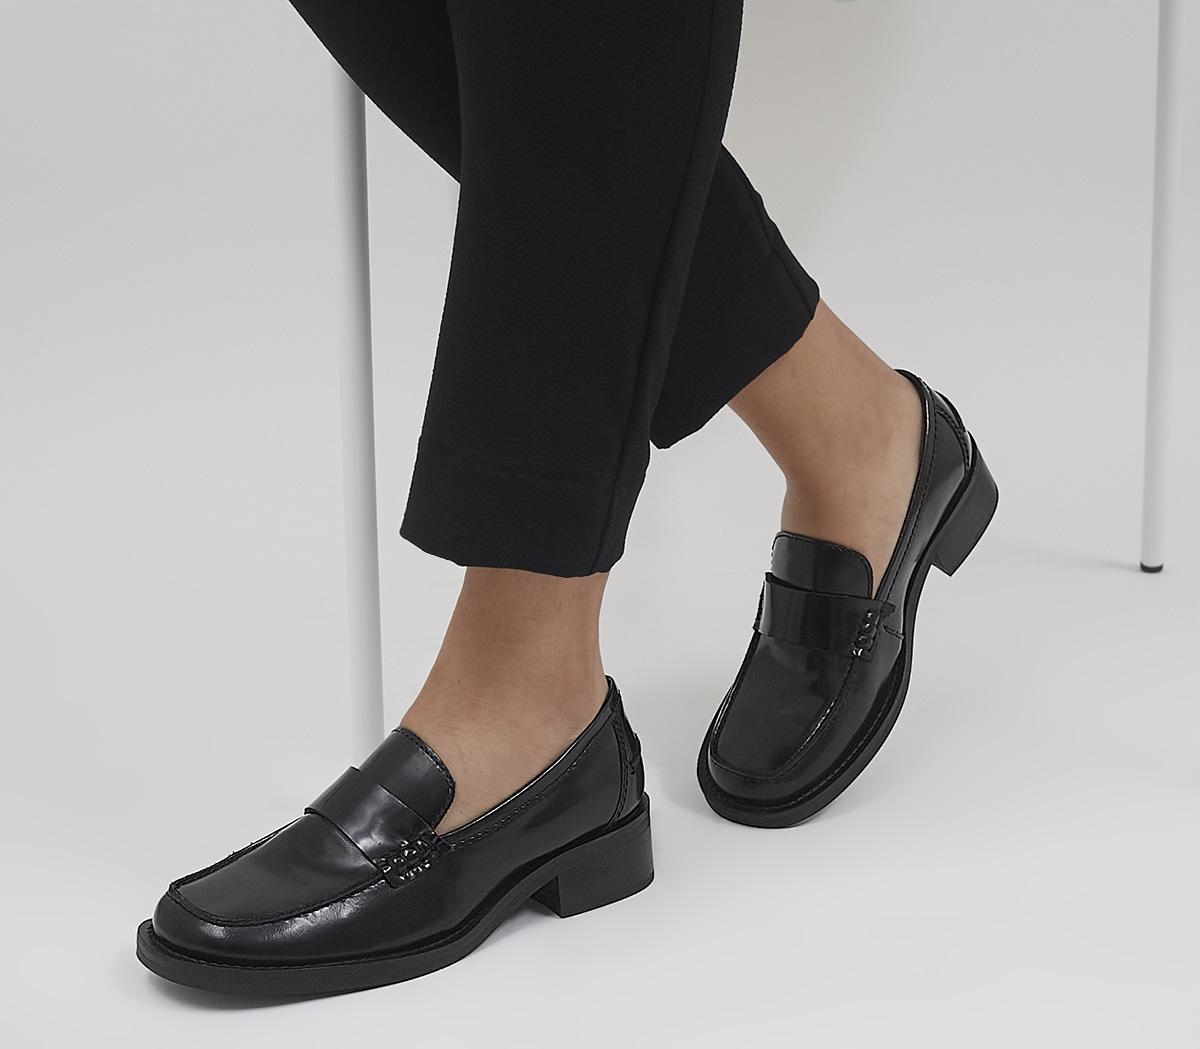 Womens Black Leather Loafers Flash SAVE 51% - icarus.photos